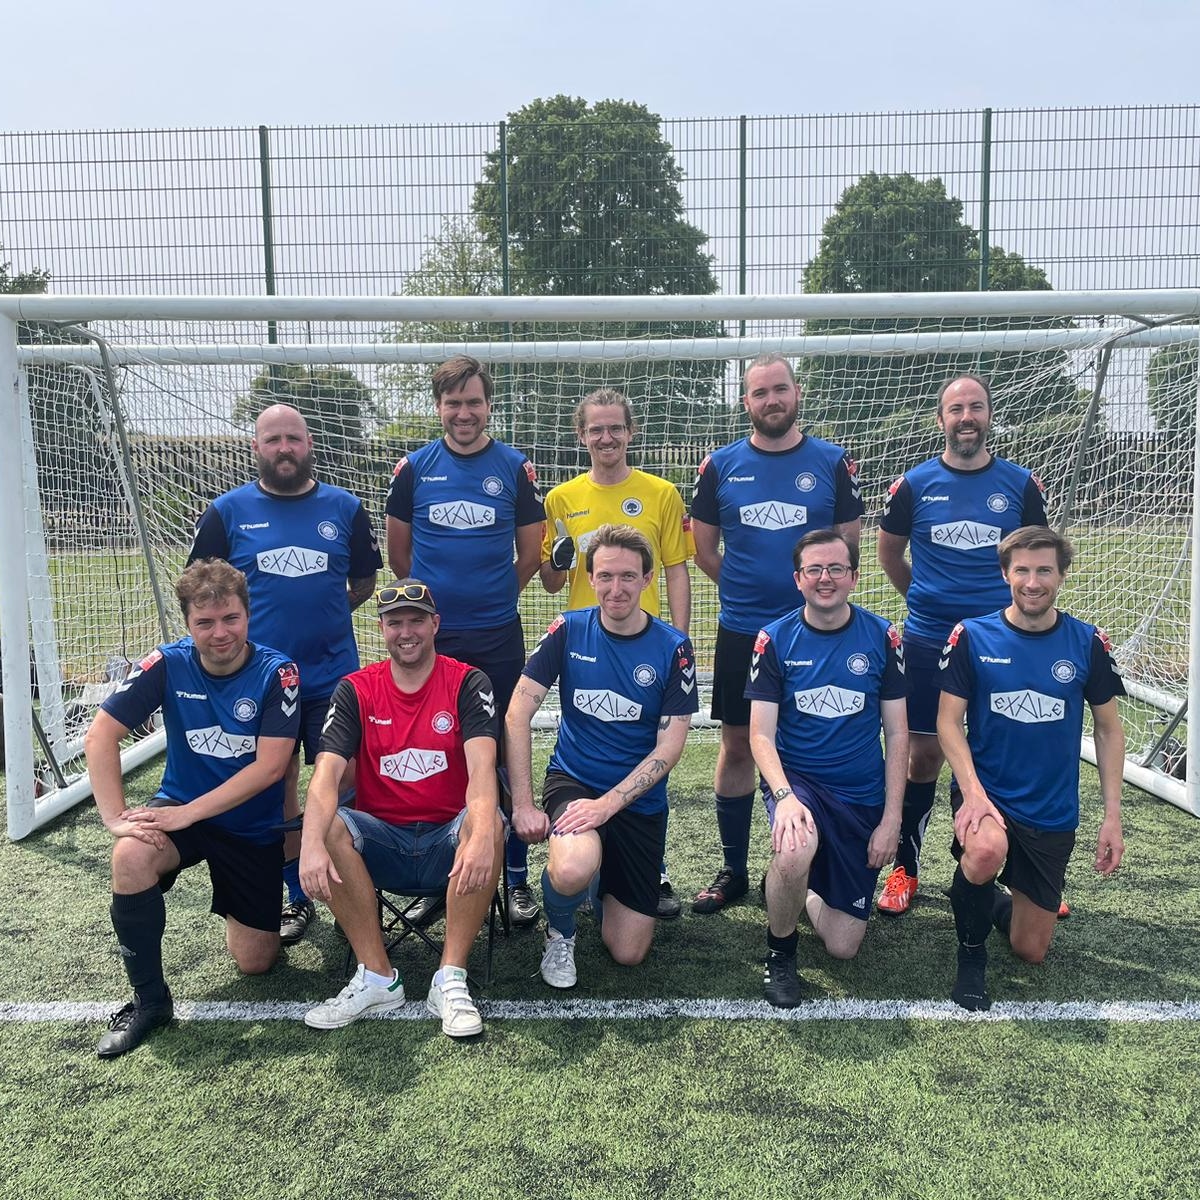 The Stow supporters team are on the lookout for a couple more players for this year's Chaos Cup. It's six-a-side against other supporters' teams from around the country. Saturday 1 June from midday, Coppermill Lane E17. Interested? Drop us a DM.